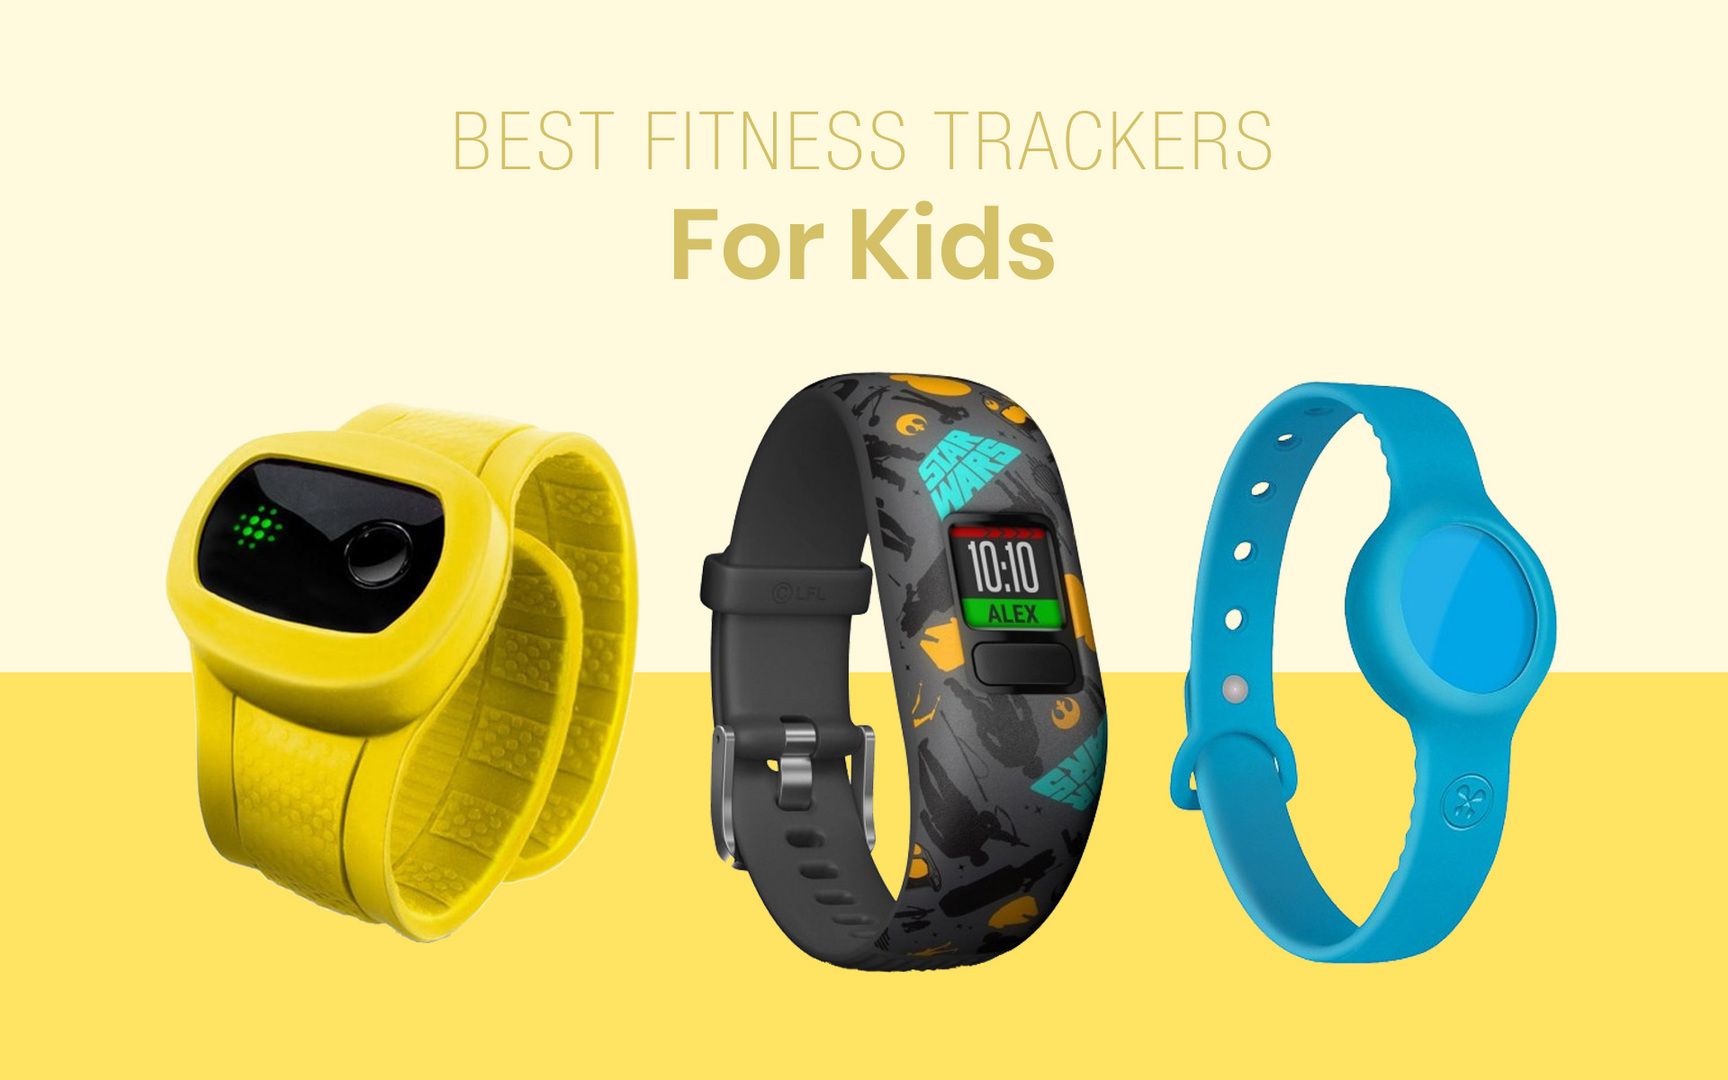 Best Fitness Trackers For Kids